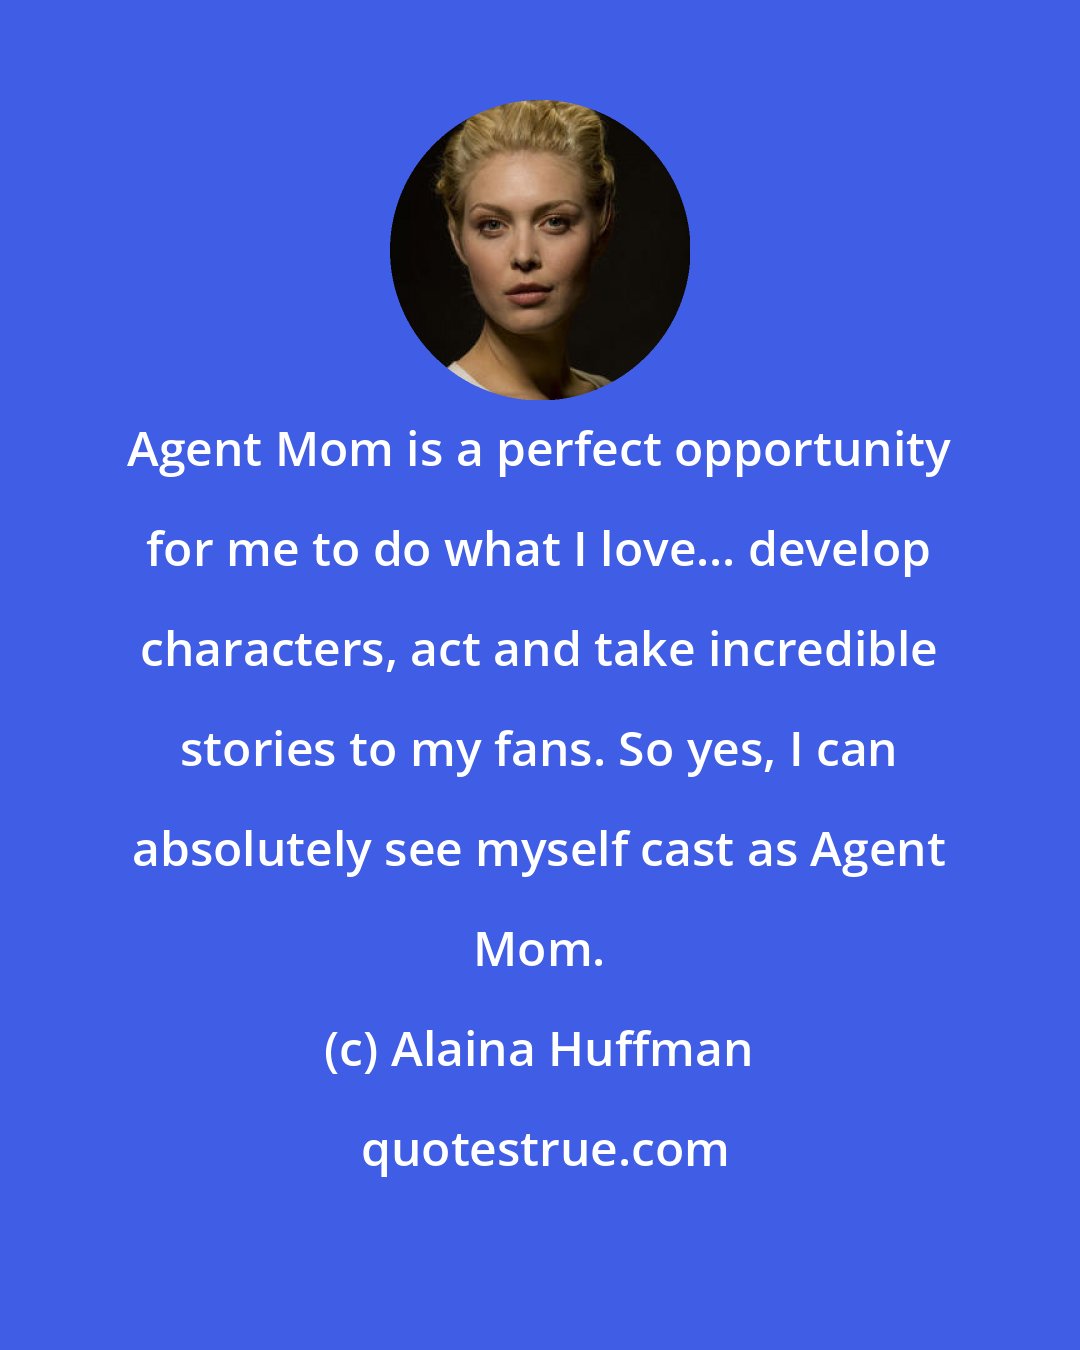 Alaina Huffman: Agent Mom is a perfect opportunity for me to do what I love... develop characters, act and take incredible stories to my fans. So yes, I can absolutely see myself cast as Agent Mom.